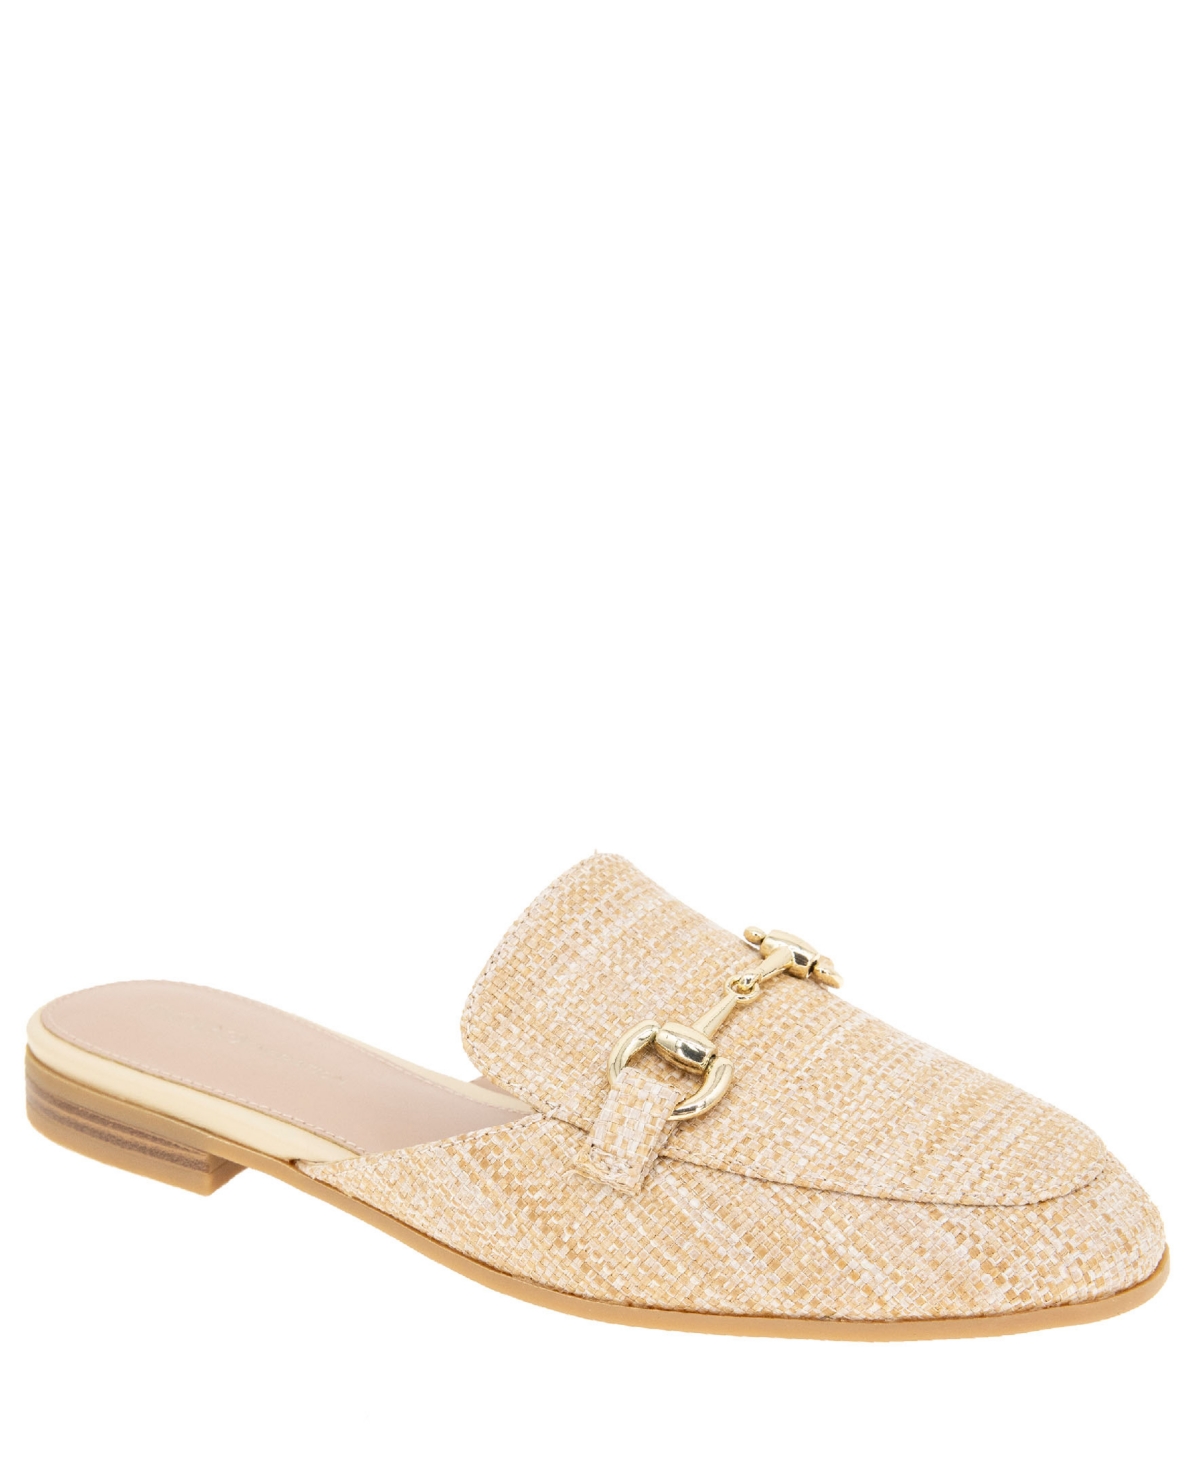 Bcbgeneration Women's Zorie Tailored Slip-on Loafer Mules In Natural Raffia